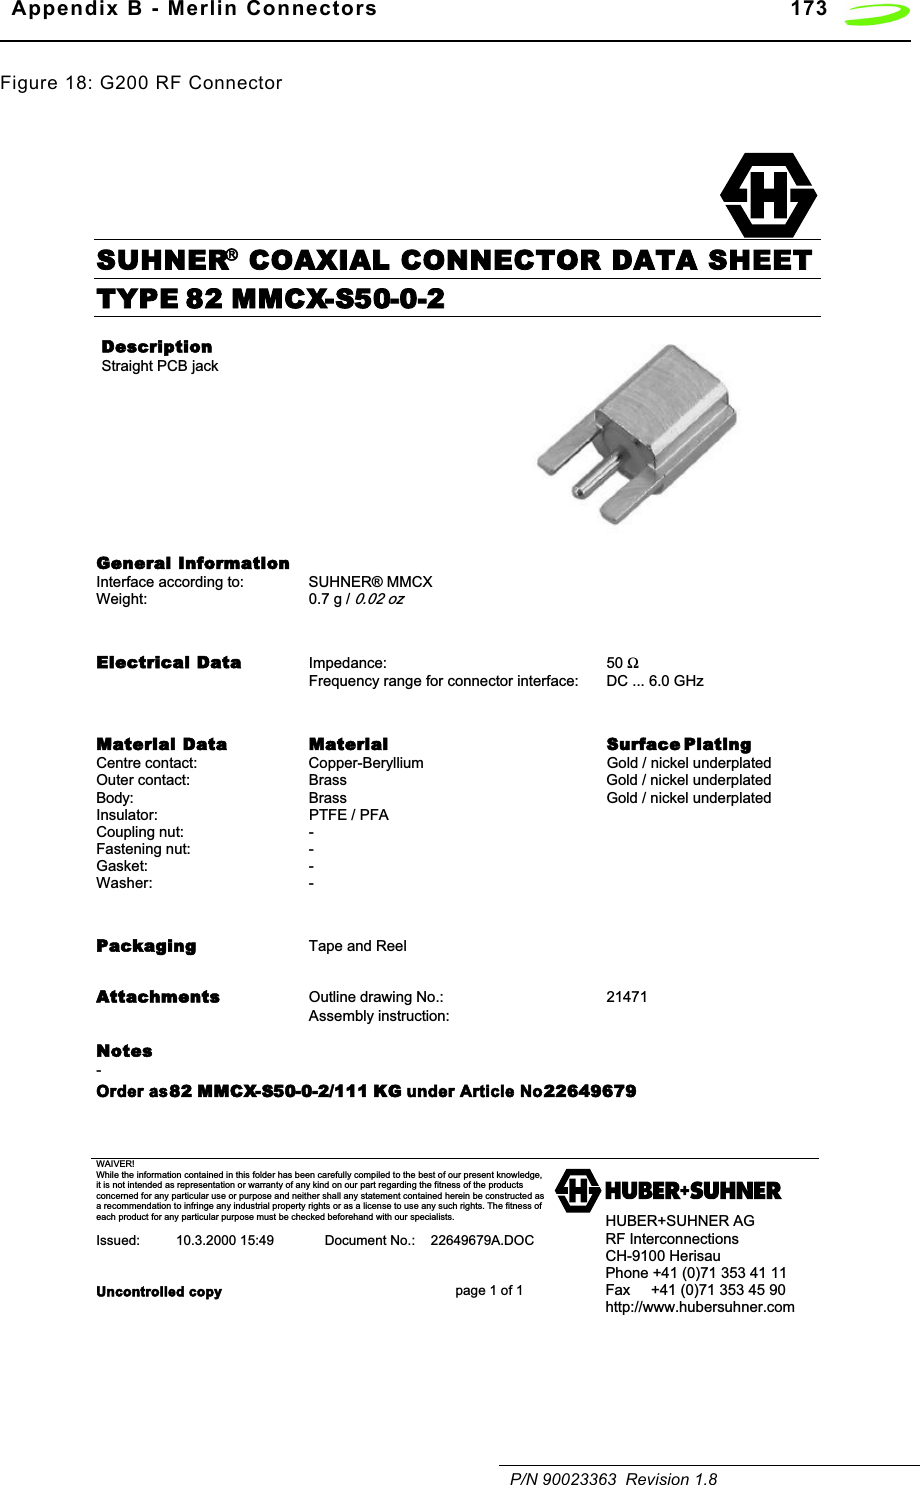   Appendix B - Merlin Connectors 173   P/N 90023363  Revision 1.8Figure 18: G200 RF ConnectorSUHNER COAXIAL CONNECTOR DATA SHEETWAIVER!While the information contained in this folder has been carefully compiled to the best of our present knowledge,it is not intended as representation or warranty of any kind on our part regarding the fitness of the productsconcerned for any particular use or purpose and neither shall any statement contained herein be constructed asa recommendation to infringe any industrial property rights or as a license to use any such rights. The fitness ofeach product for any particular purpose must be checked beforehand with our specialists.Issued: 10.3.2000 15:49 Document No.: 22649679A.DOCUncontrolled copy page 1 of 1HUBER+SUHNER AGRF InterconnectionsCH-9100 HerisauPhone +41 (0)71 353 41 11Fax     +41 (0)71 353 45 90http://www.hubersuhner.comTYPE 82 MMCX-S50-0-2DescriptionStraight PCB jackGeneral InformationInterface according to: SUHNER® MMCXWeight: 0.7 g / 0.02 ozElectrical Data Impedance: 50 ΩFrequency range for connector interface:  DC ... 6.0 GHzMaterial Data Material Surface PlatingCentre contact: Copper-Beryllium Gold / nickel underplatedOuter contact: Brass Gold / nickel underplatedBody: Brass Gold / nickel underplatedInsulator: PTFE / PFACoupling nut:  -  Fastening nut: -  Gasket: -Washer: -  Packaging Tape and ReelAttachments Outline drawing No.: 21471Assembly instruction:            Notes-Order as 82 MMCX-S50-0-2/111 KG under Article No. 22649679